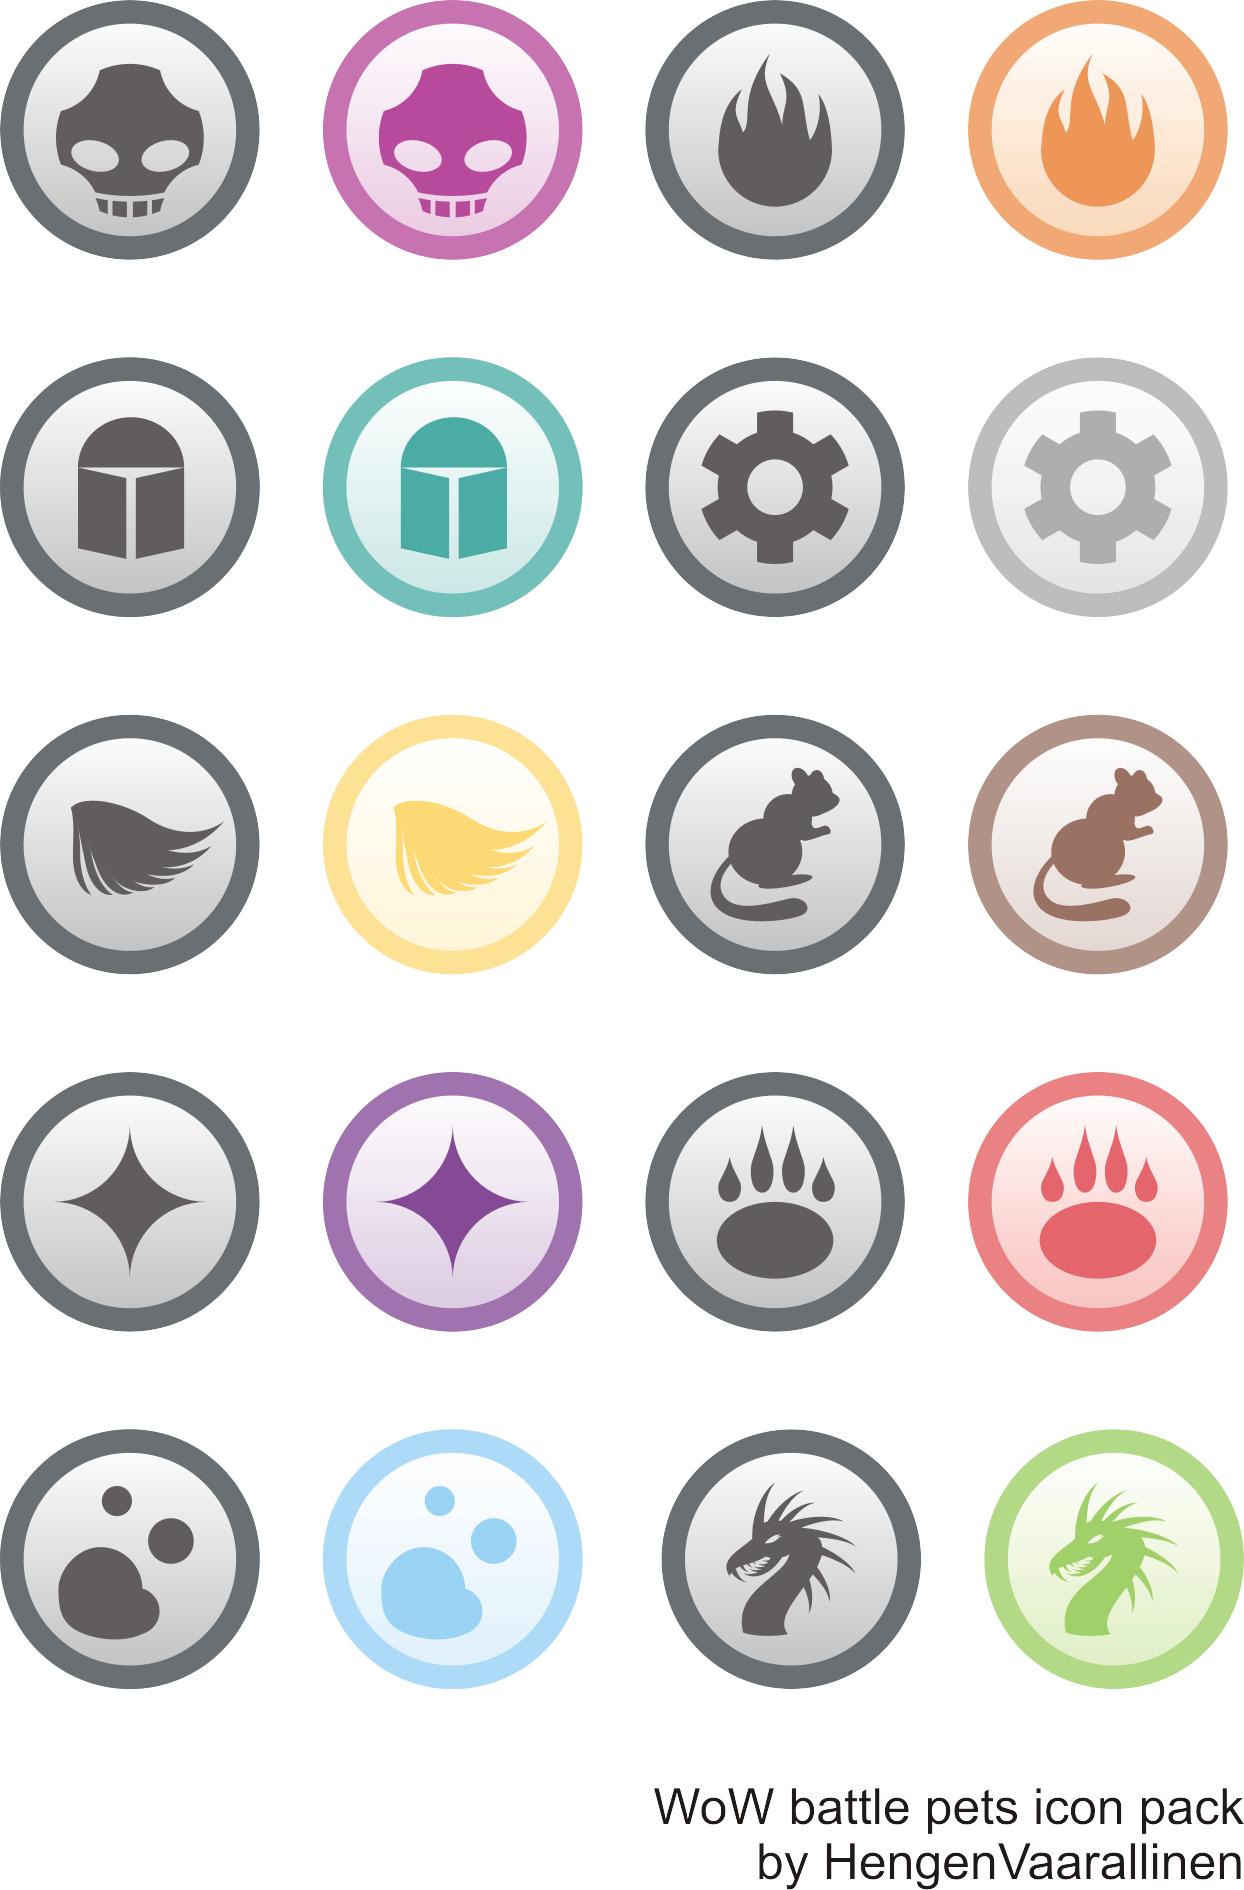 WoW battle pet icon pack